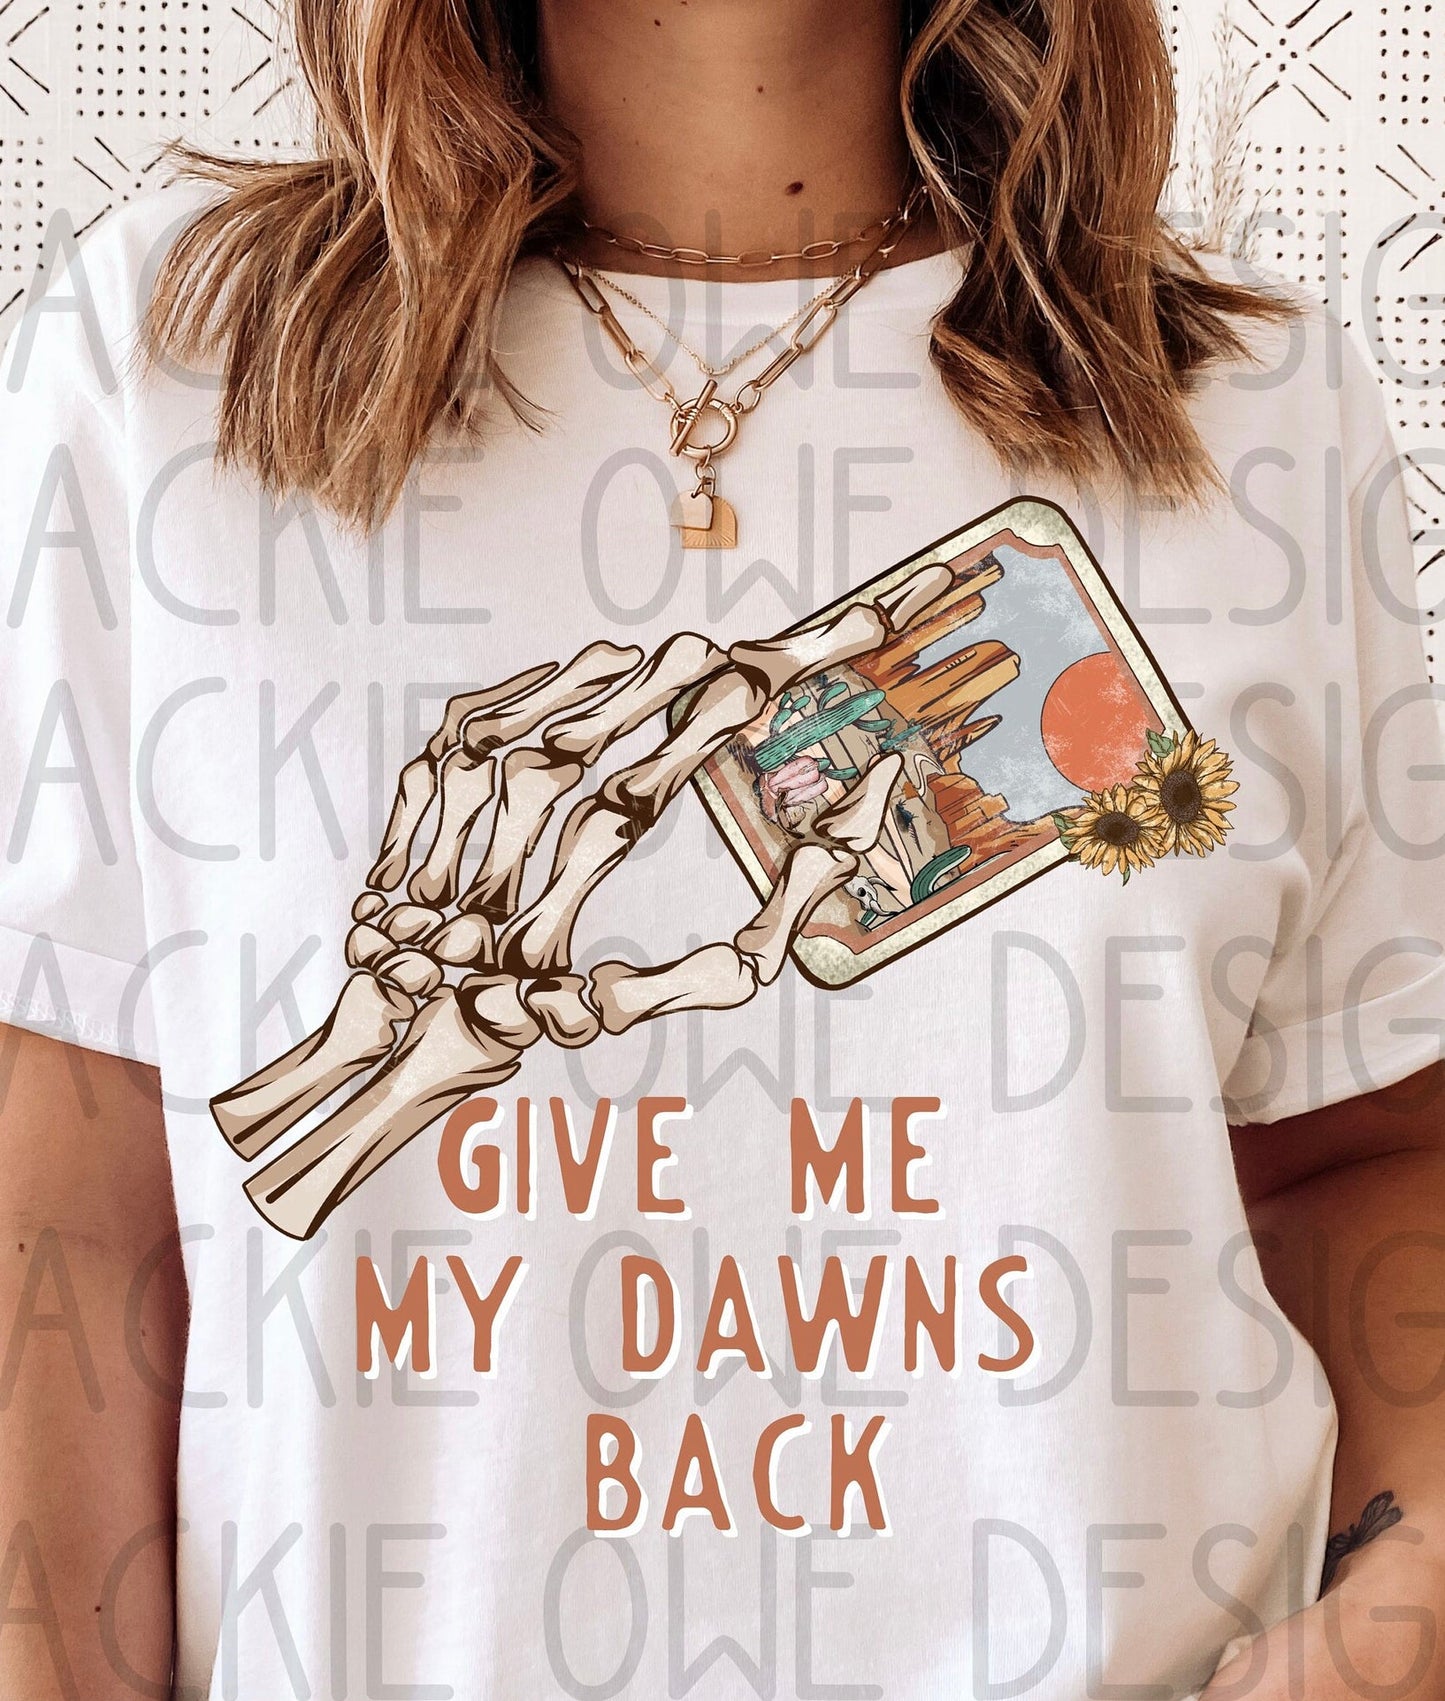 Give me my dawns back design